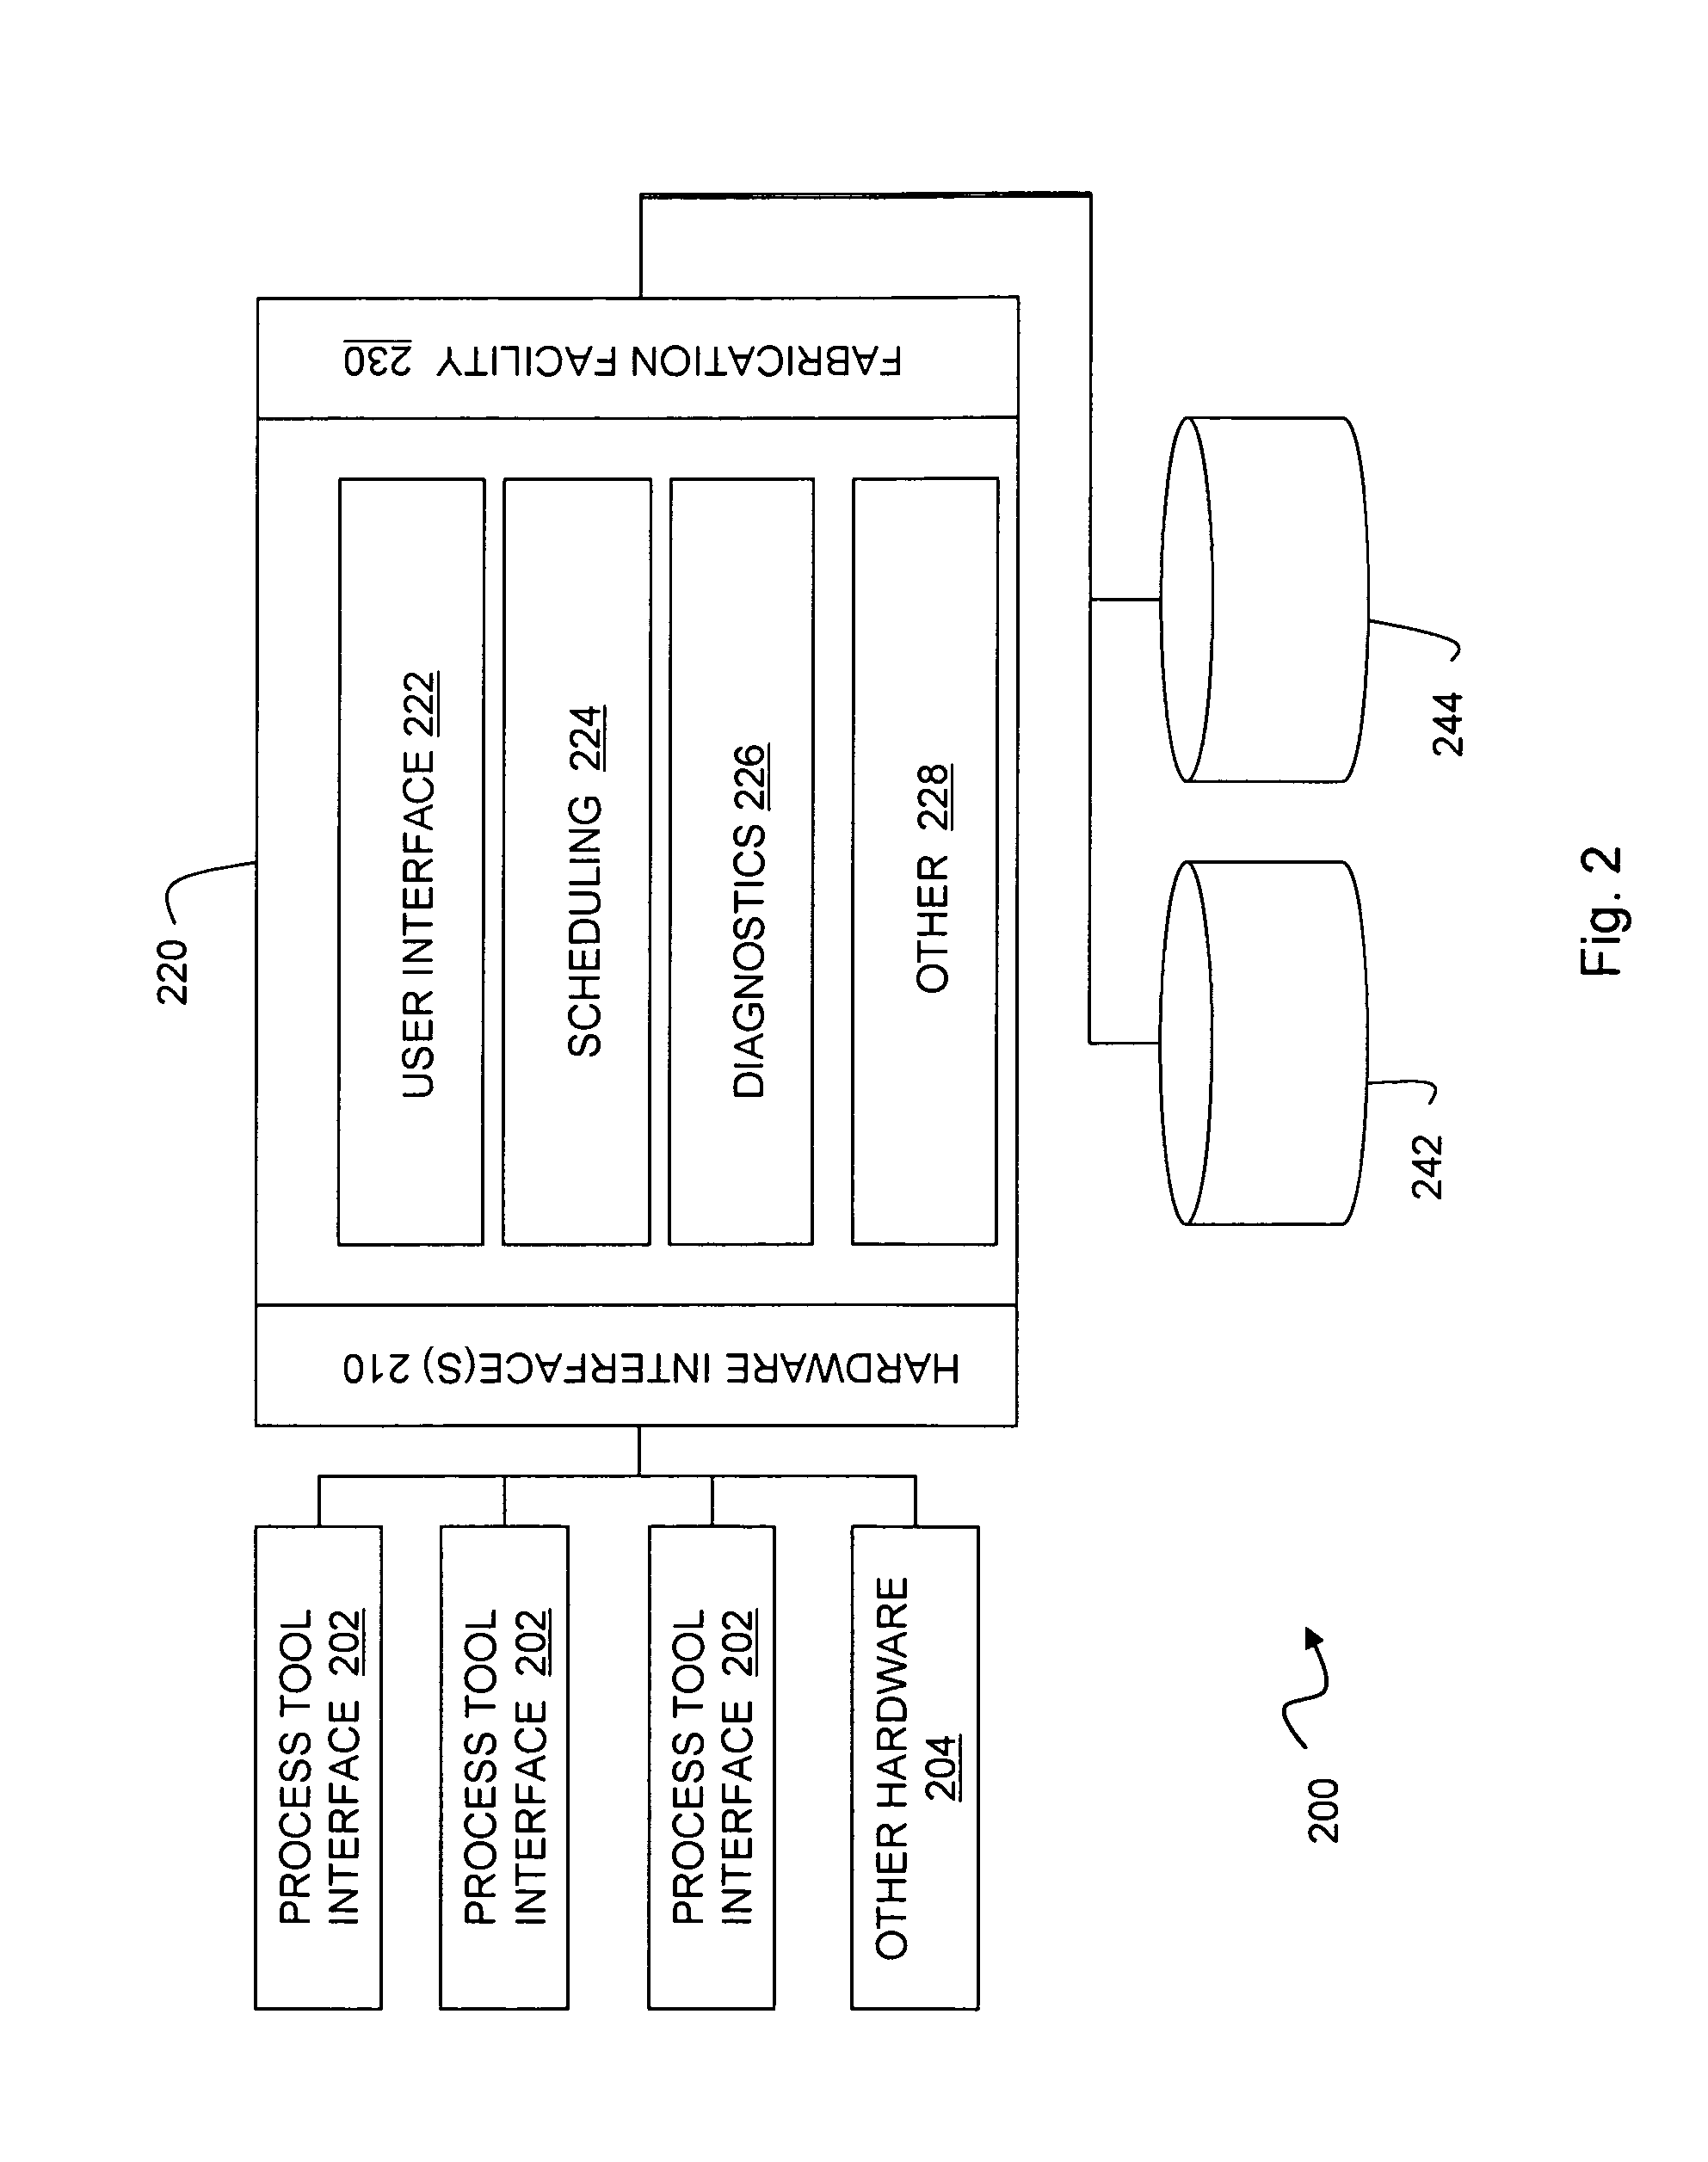 Methods and systems for controlling a semiconductor fabrication process